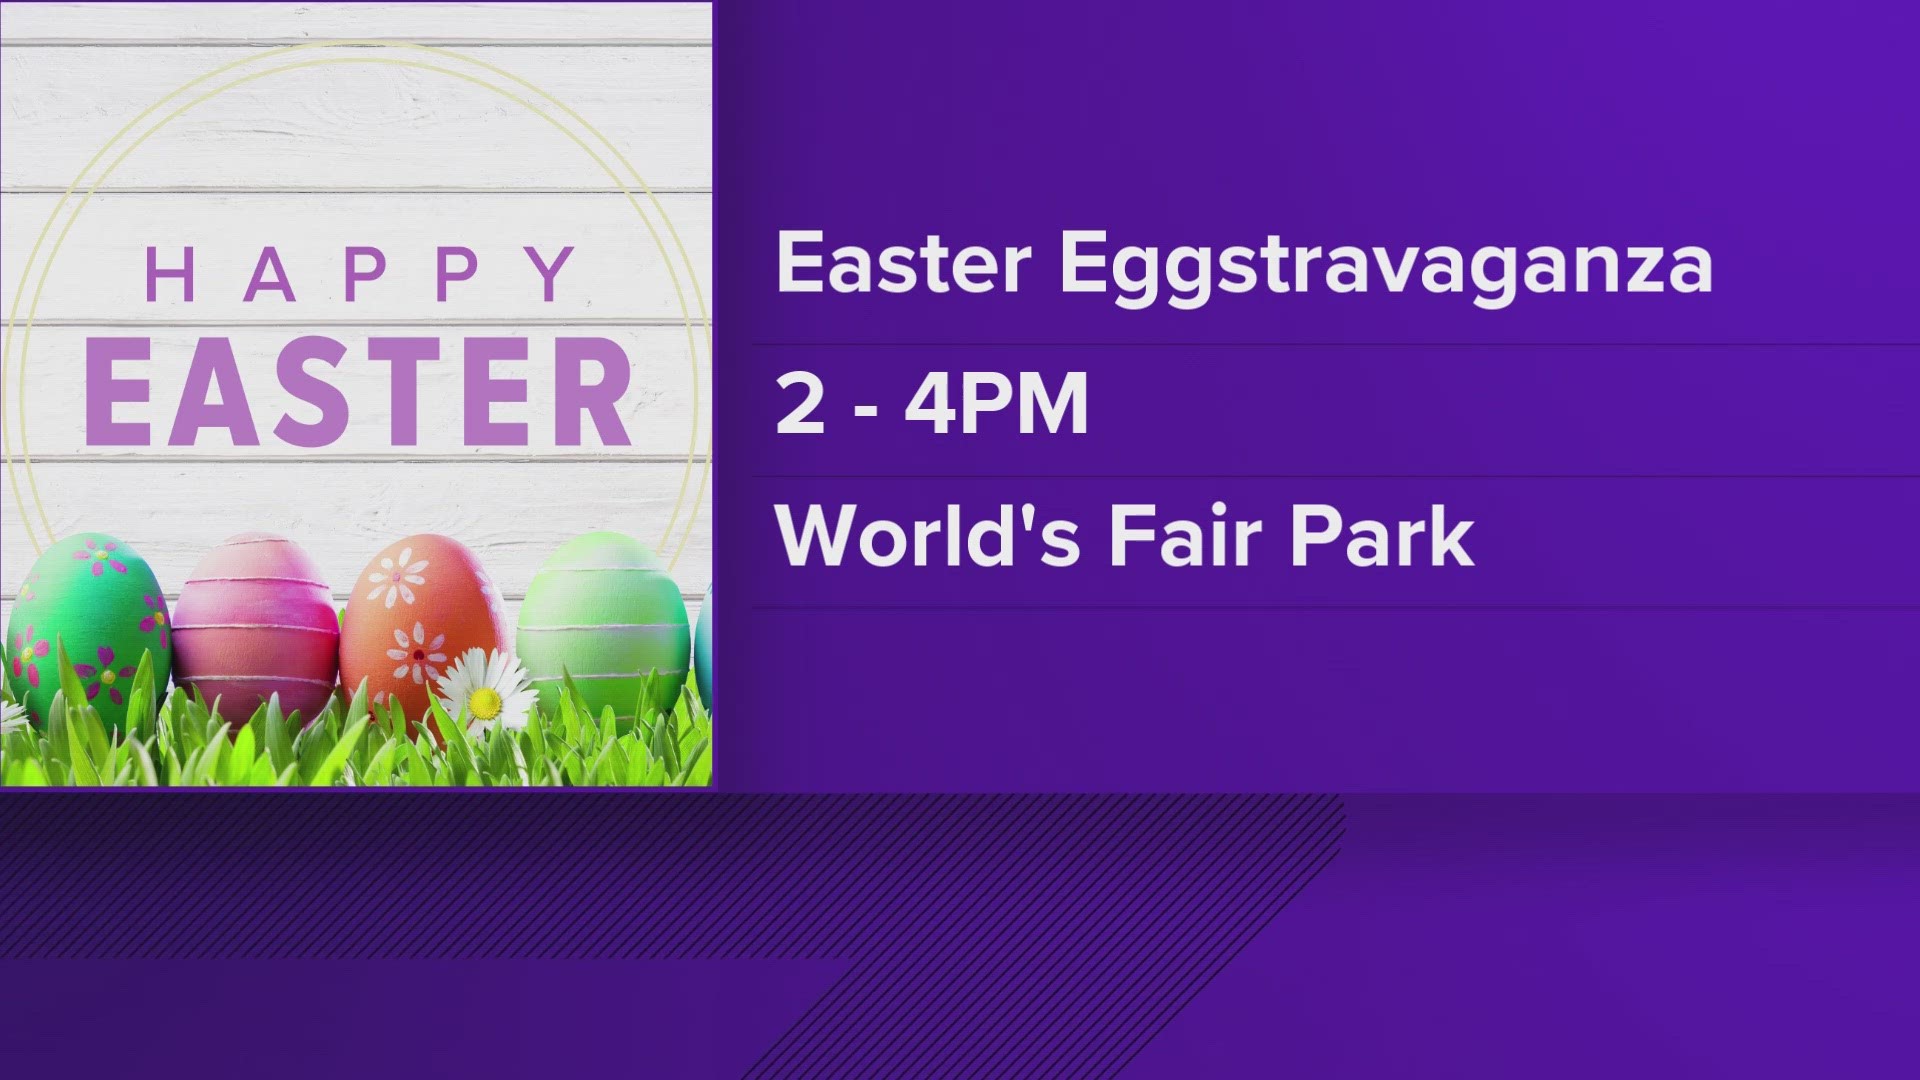 From an egg hunt in Ancient Lore Village to an Eggstravaganza, there are plenty of fun things to do!